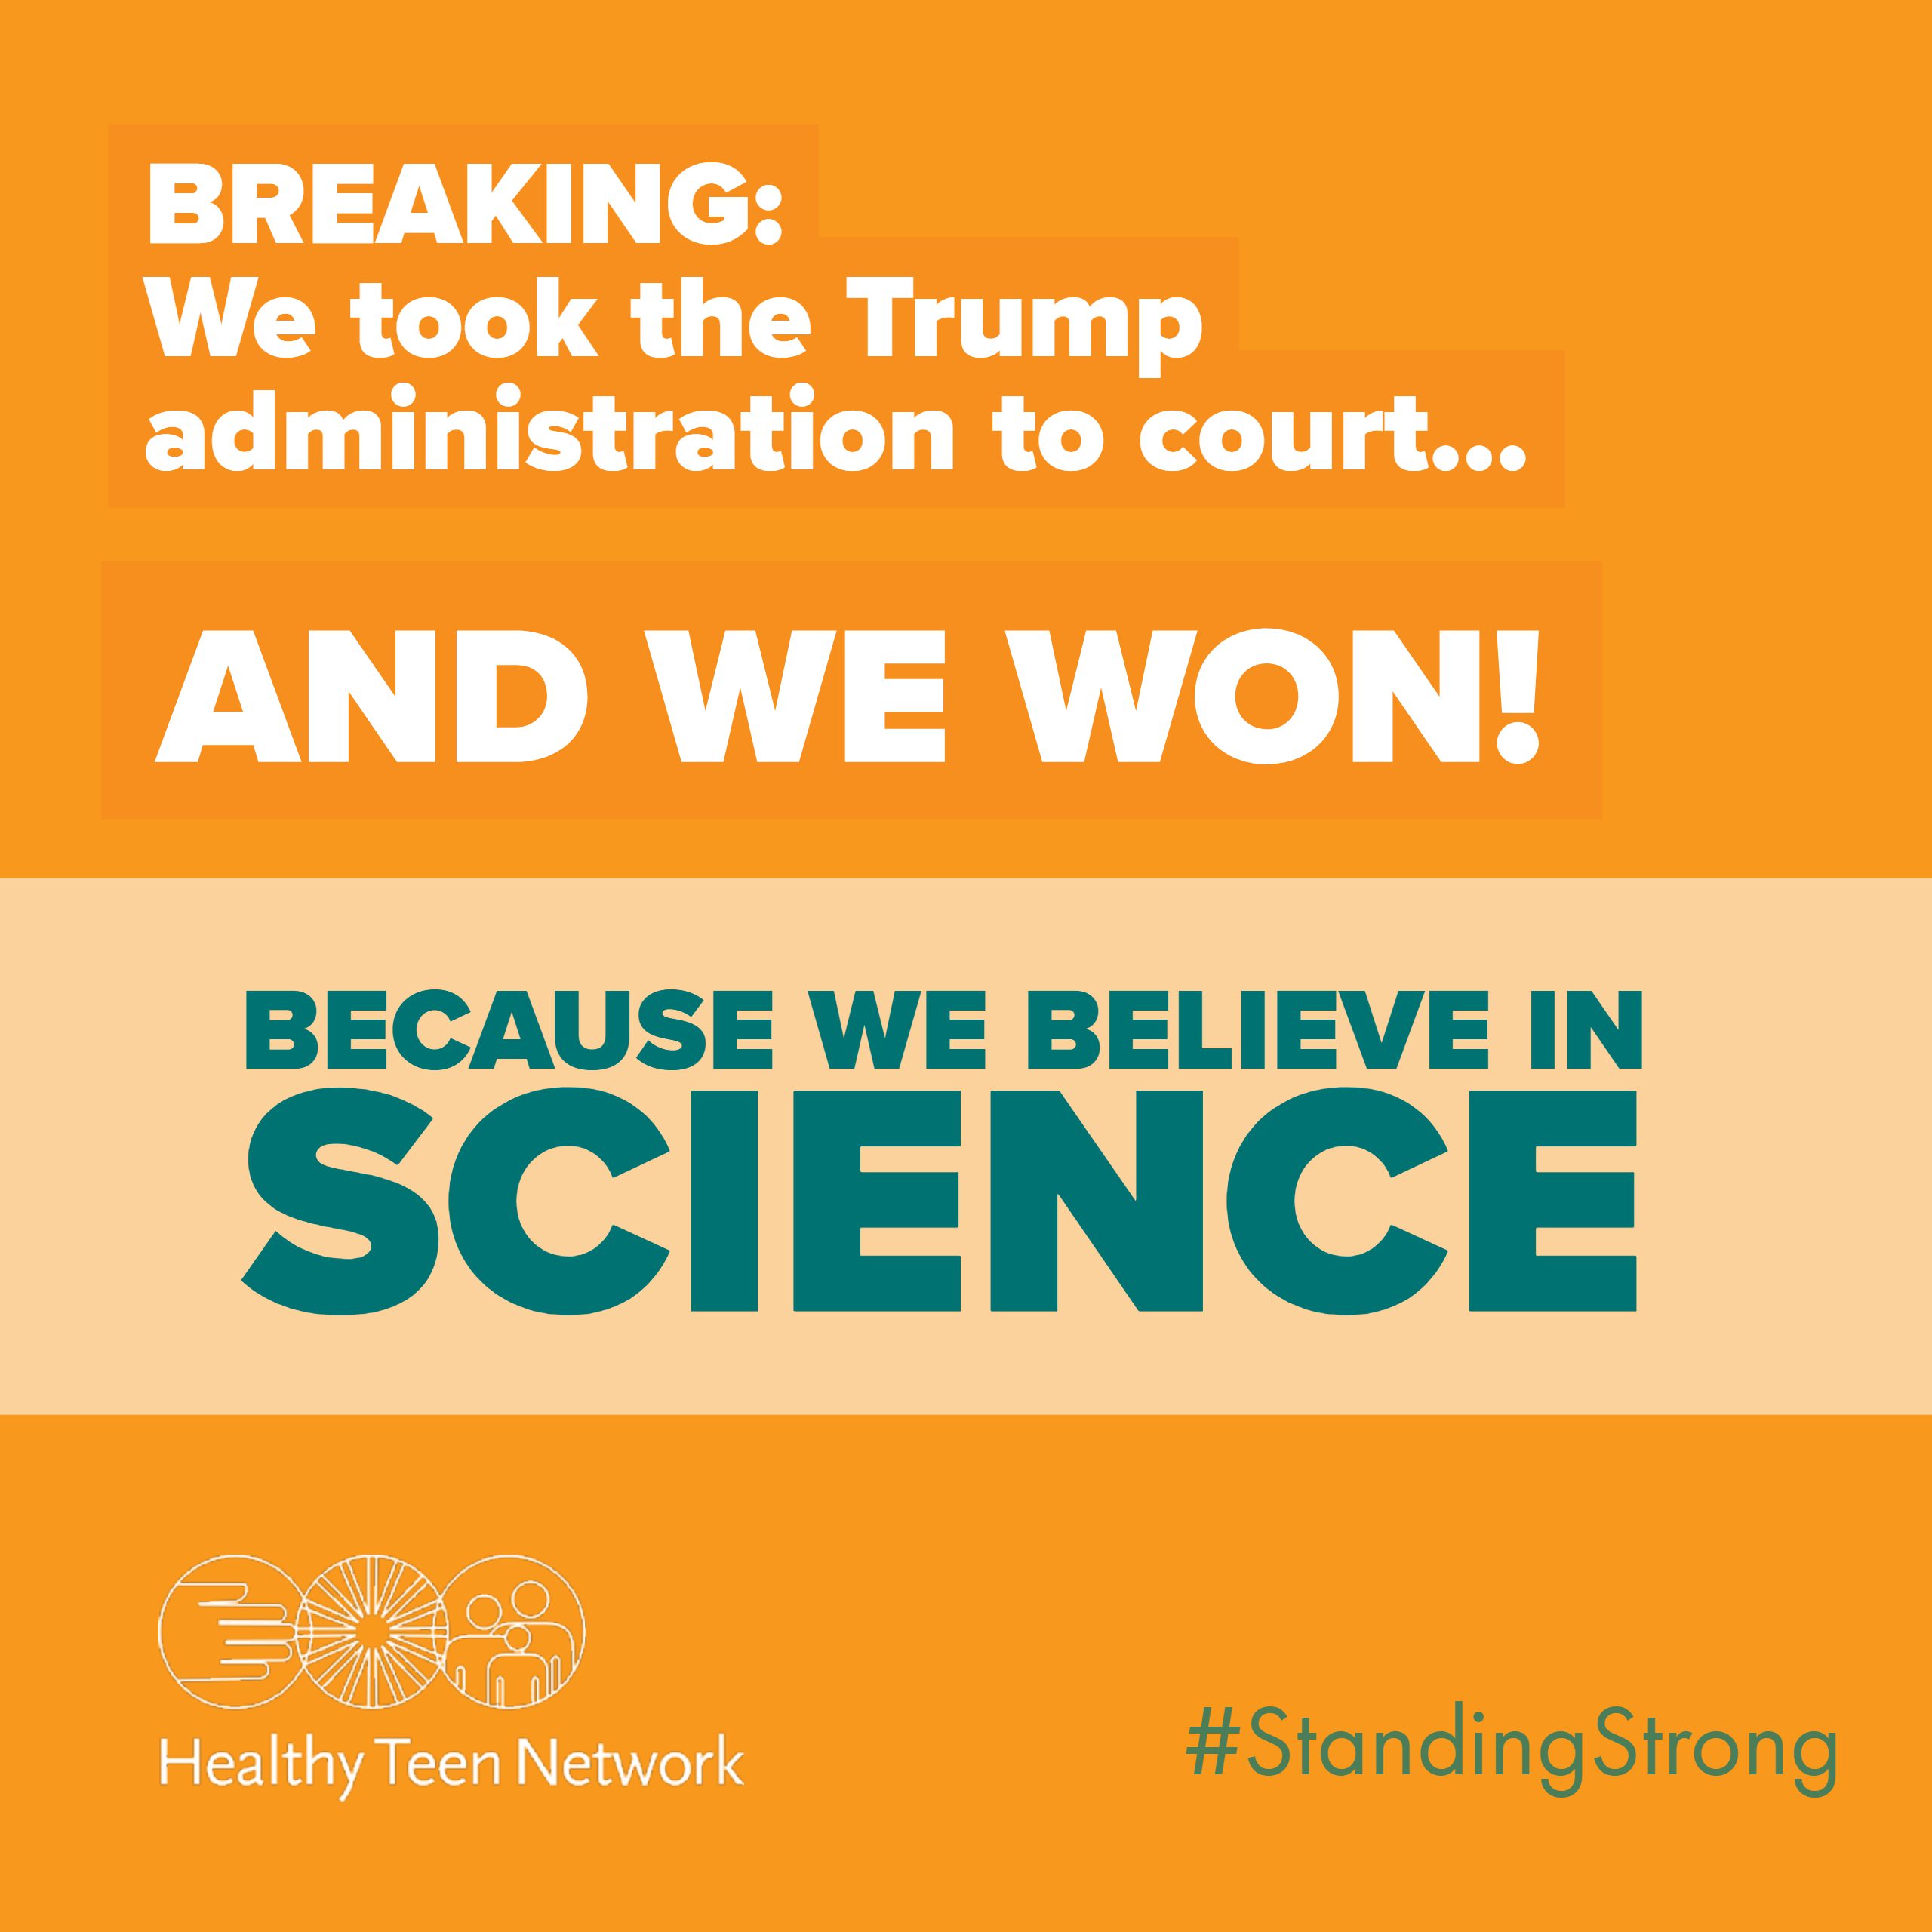 Image of word art: "Breaking: We took the Trump administration to court...and we won! Becaues we believe in Science. #standingstrong"and Healthy Teen Network logo